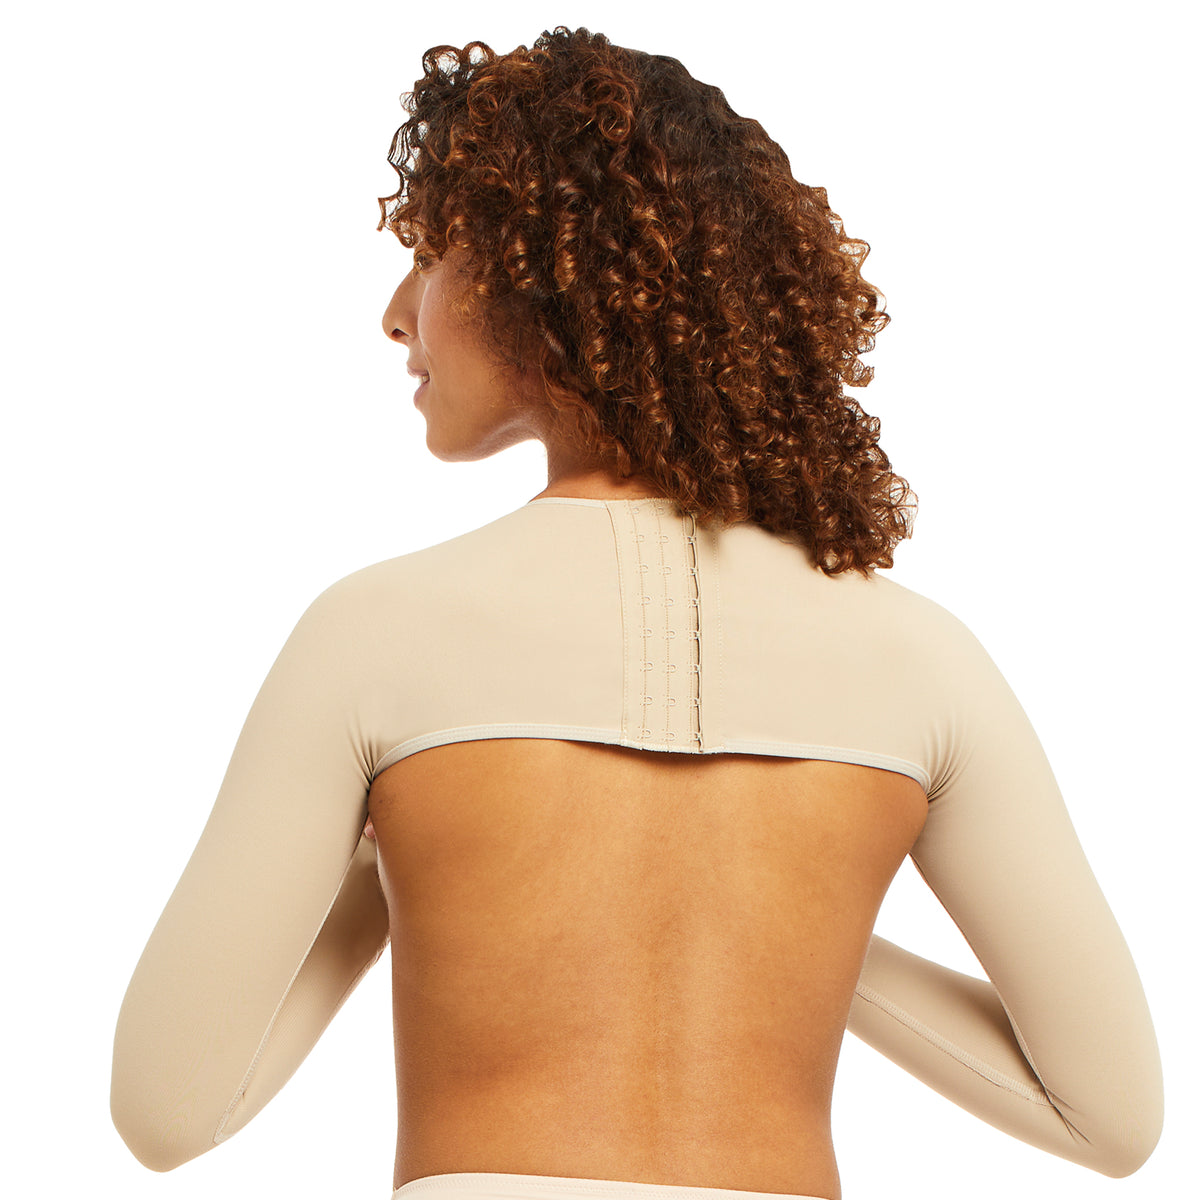 X back design under bust support and arm compression beige body